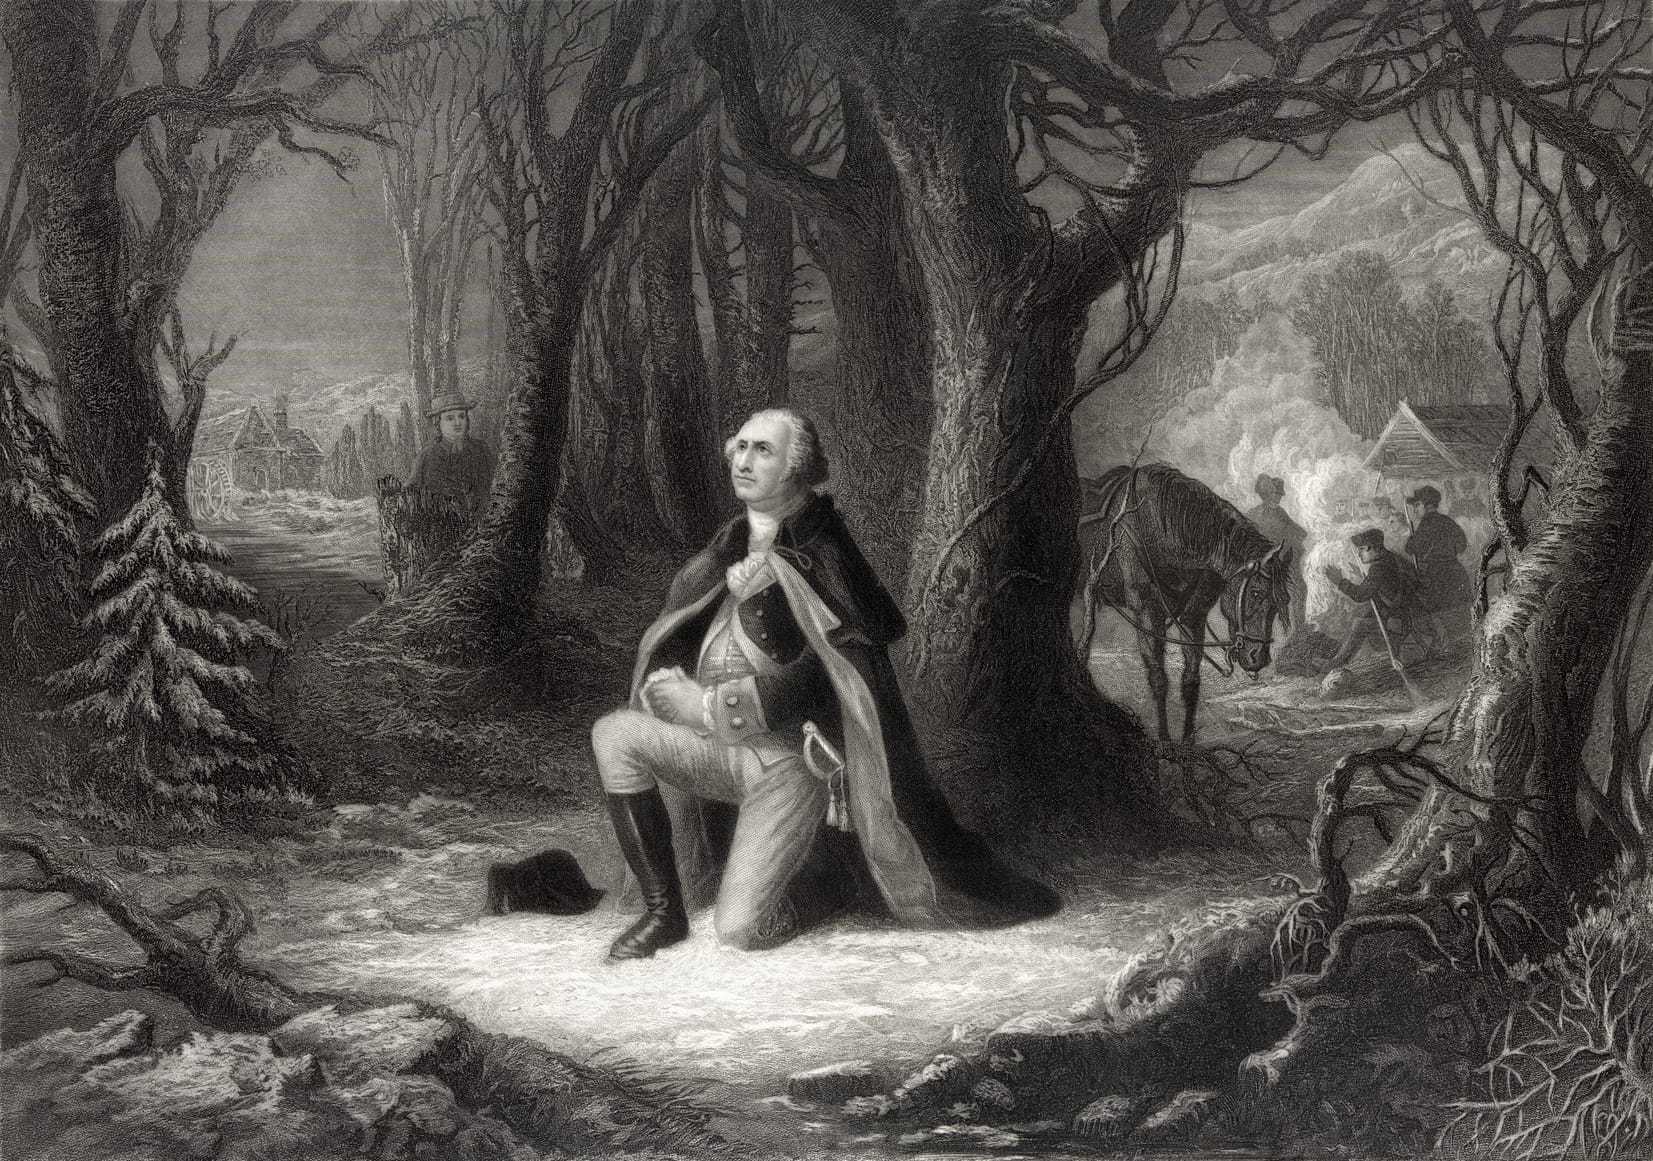 An black and white illustration of George Washington kneeling outside in a forest with the light shining on him.